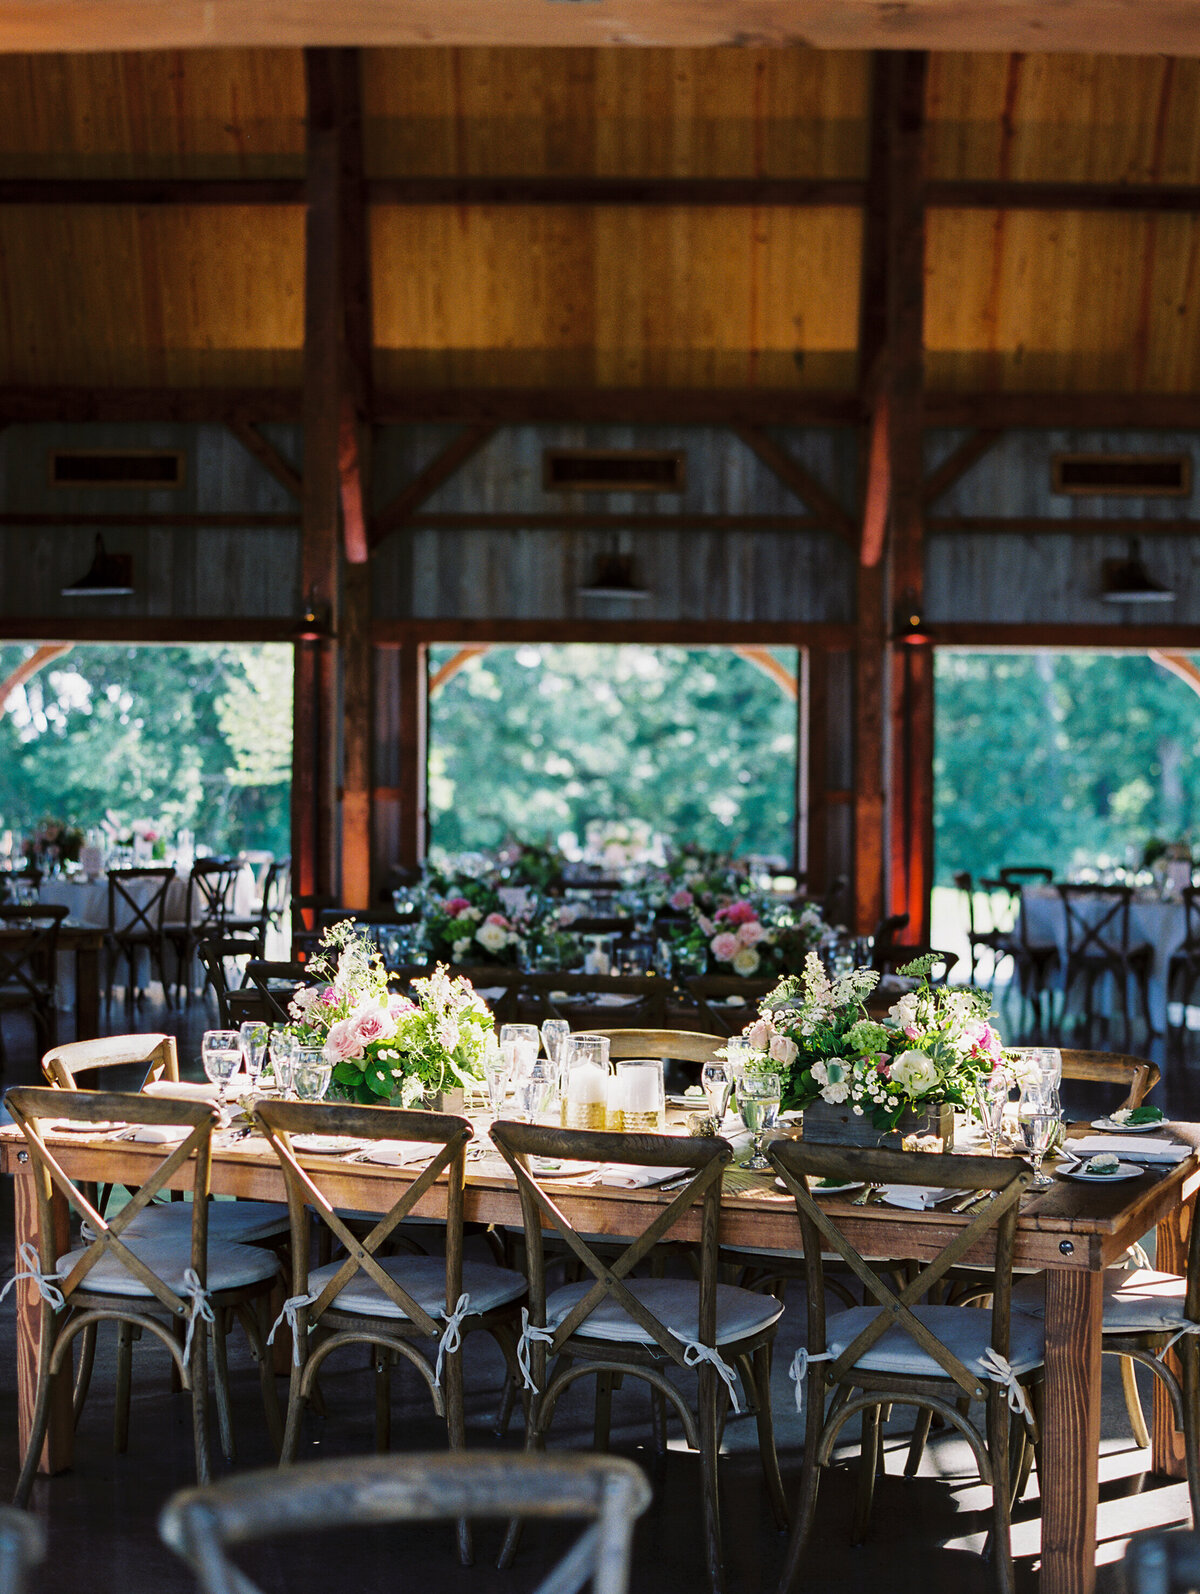 Wooden tables with  floral centerpieces and wooden chairs